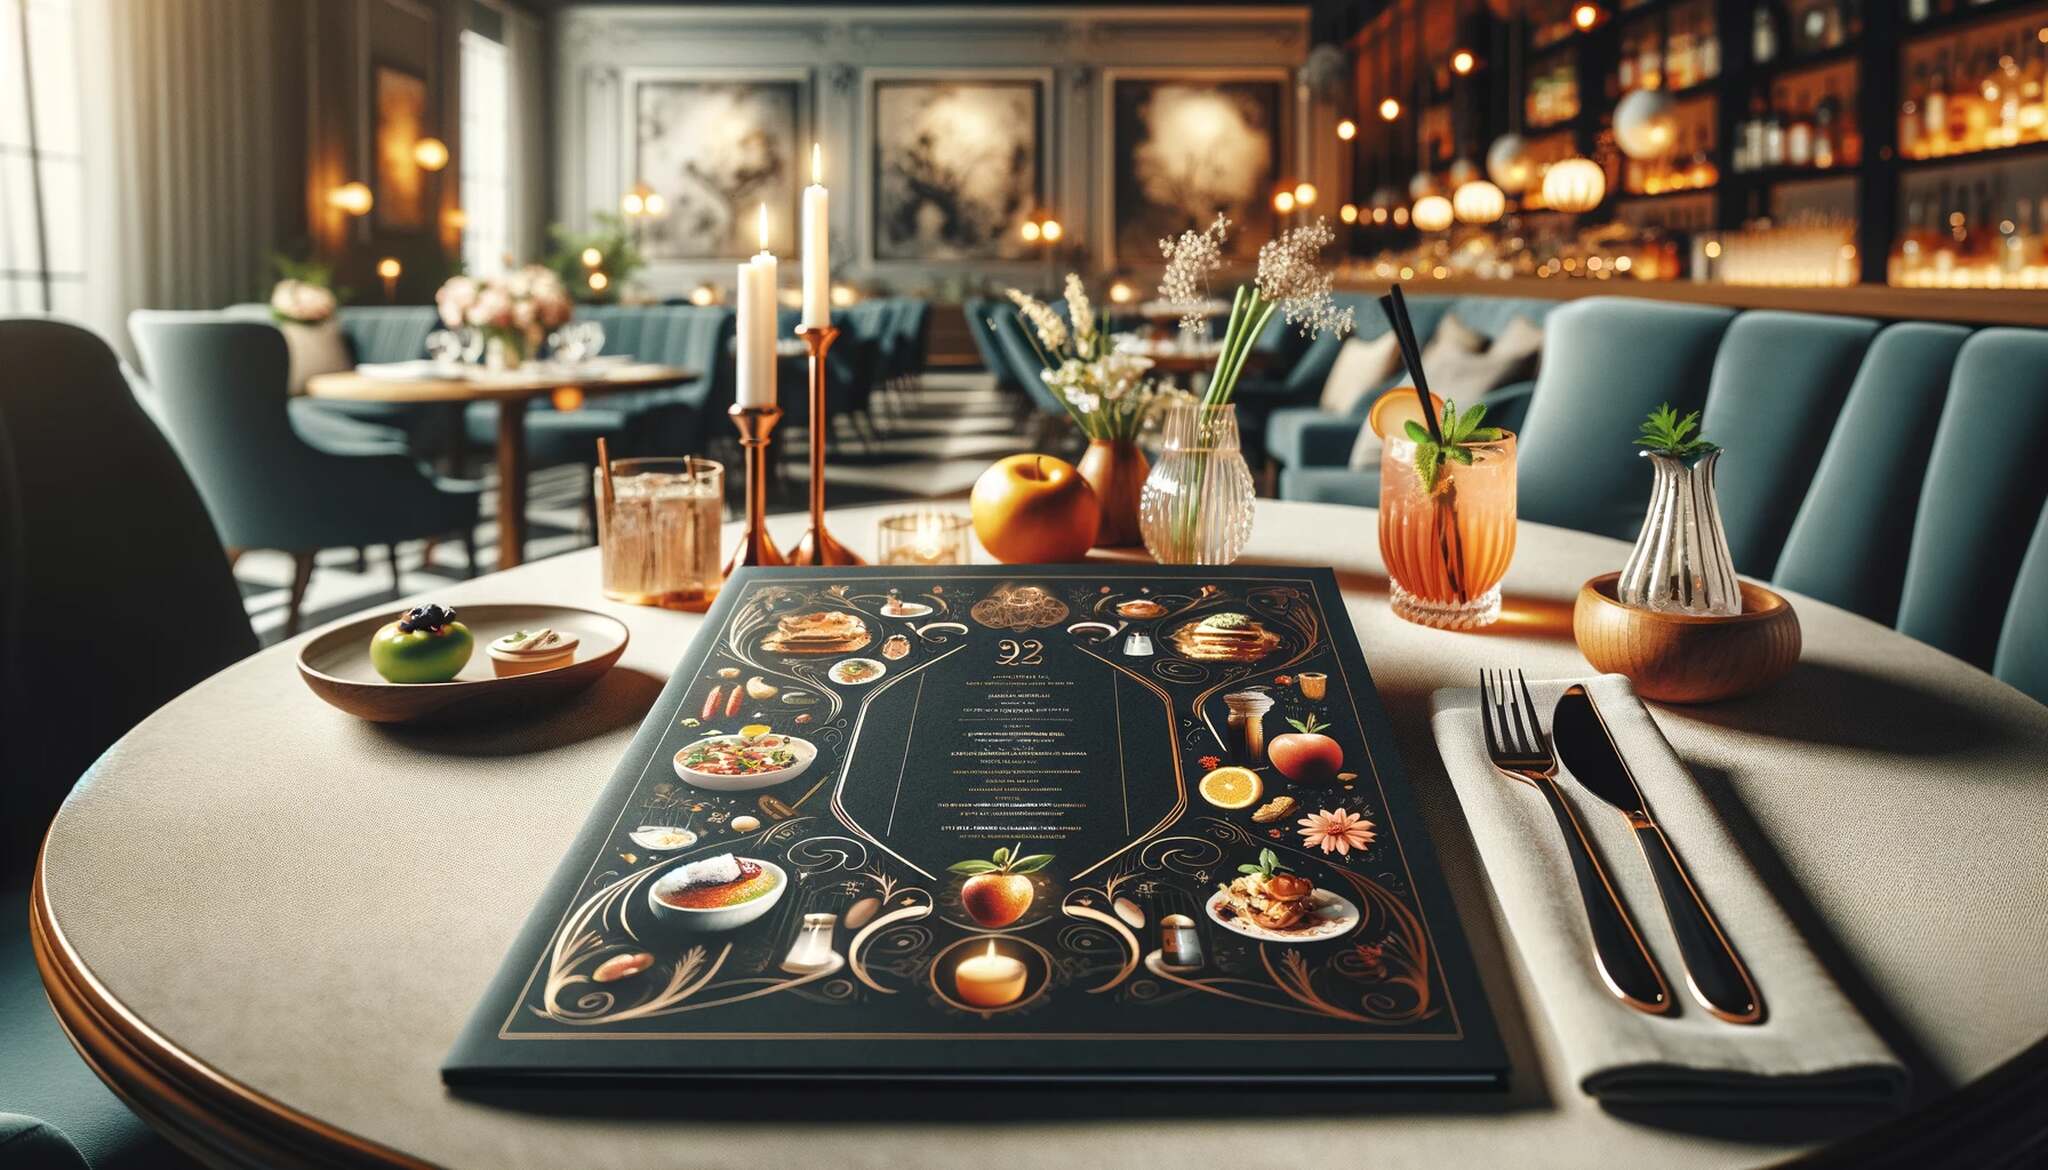 a stylish restaurant menu on a table, with elegant design elements, and drinks